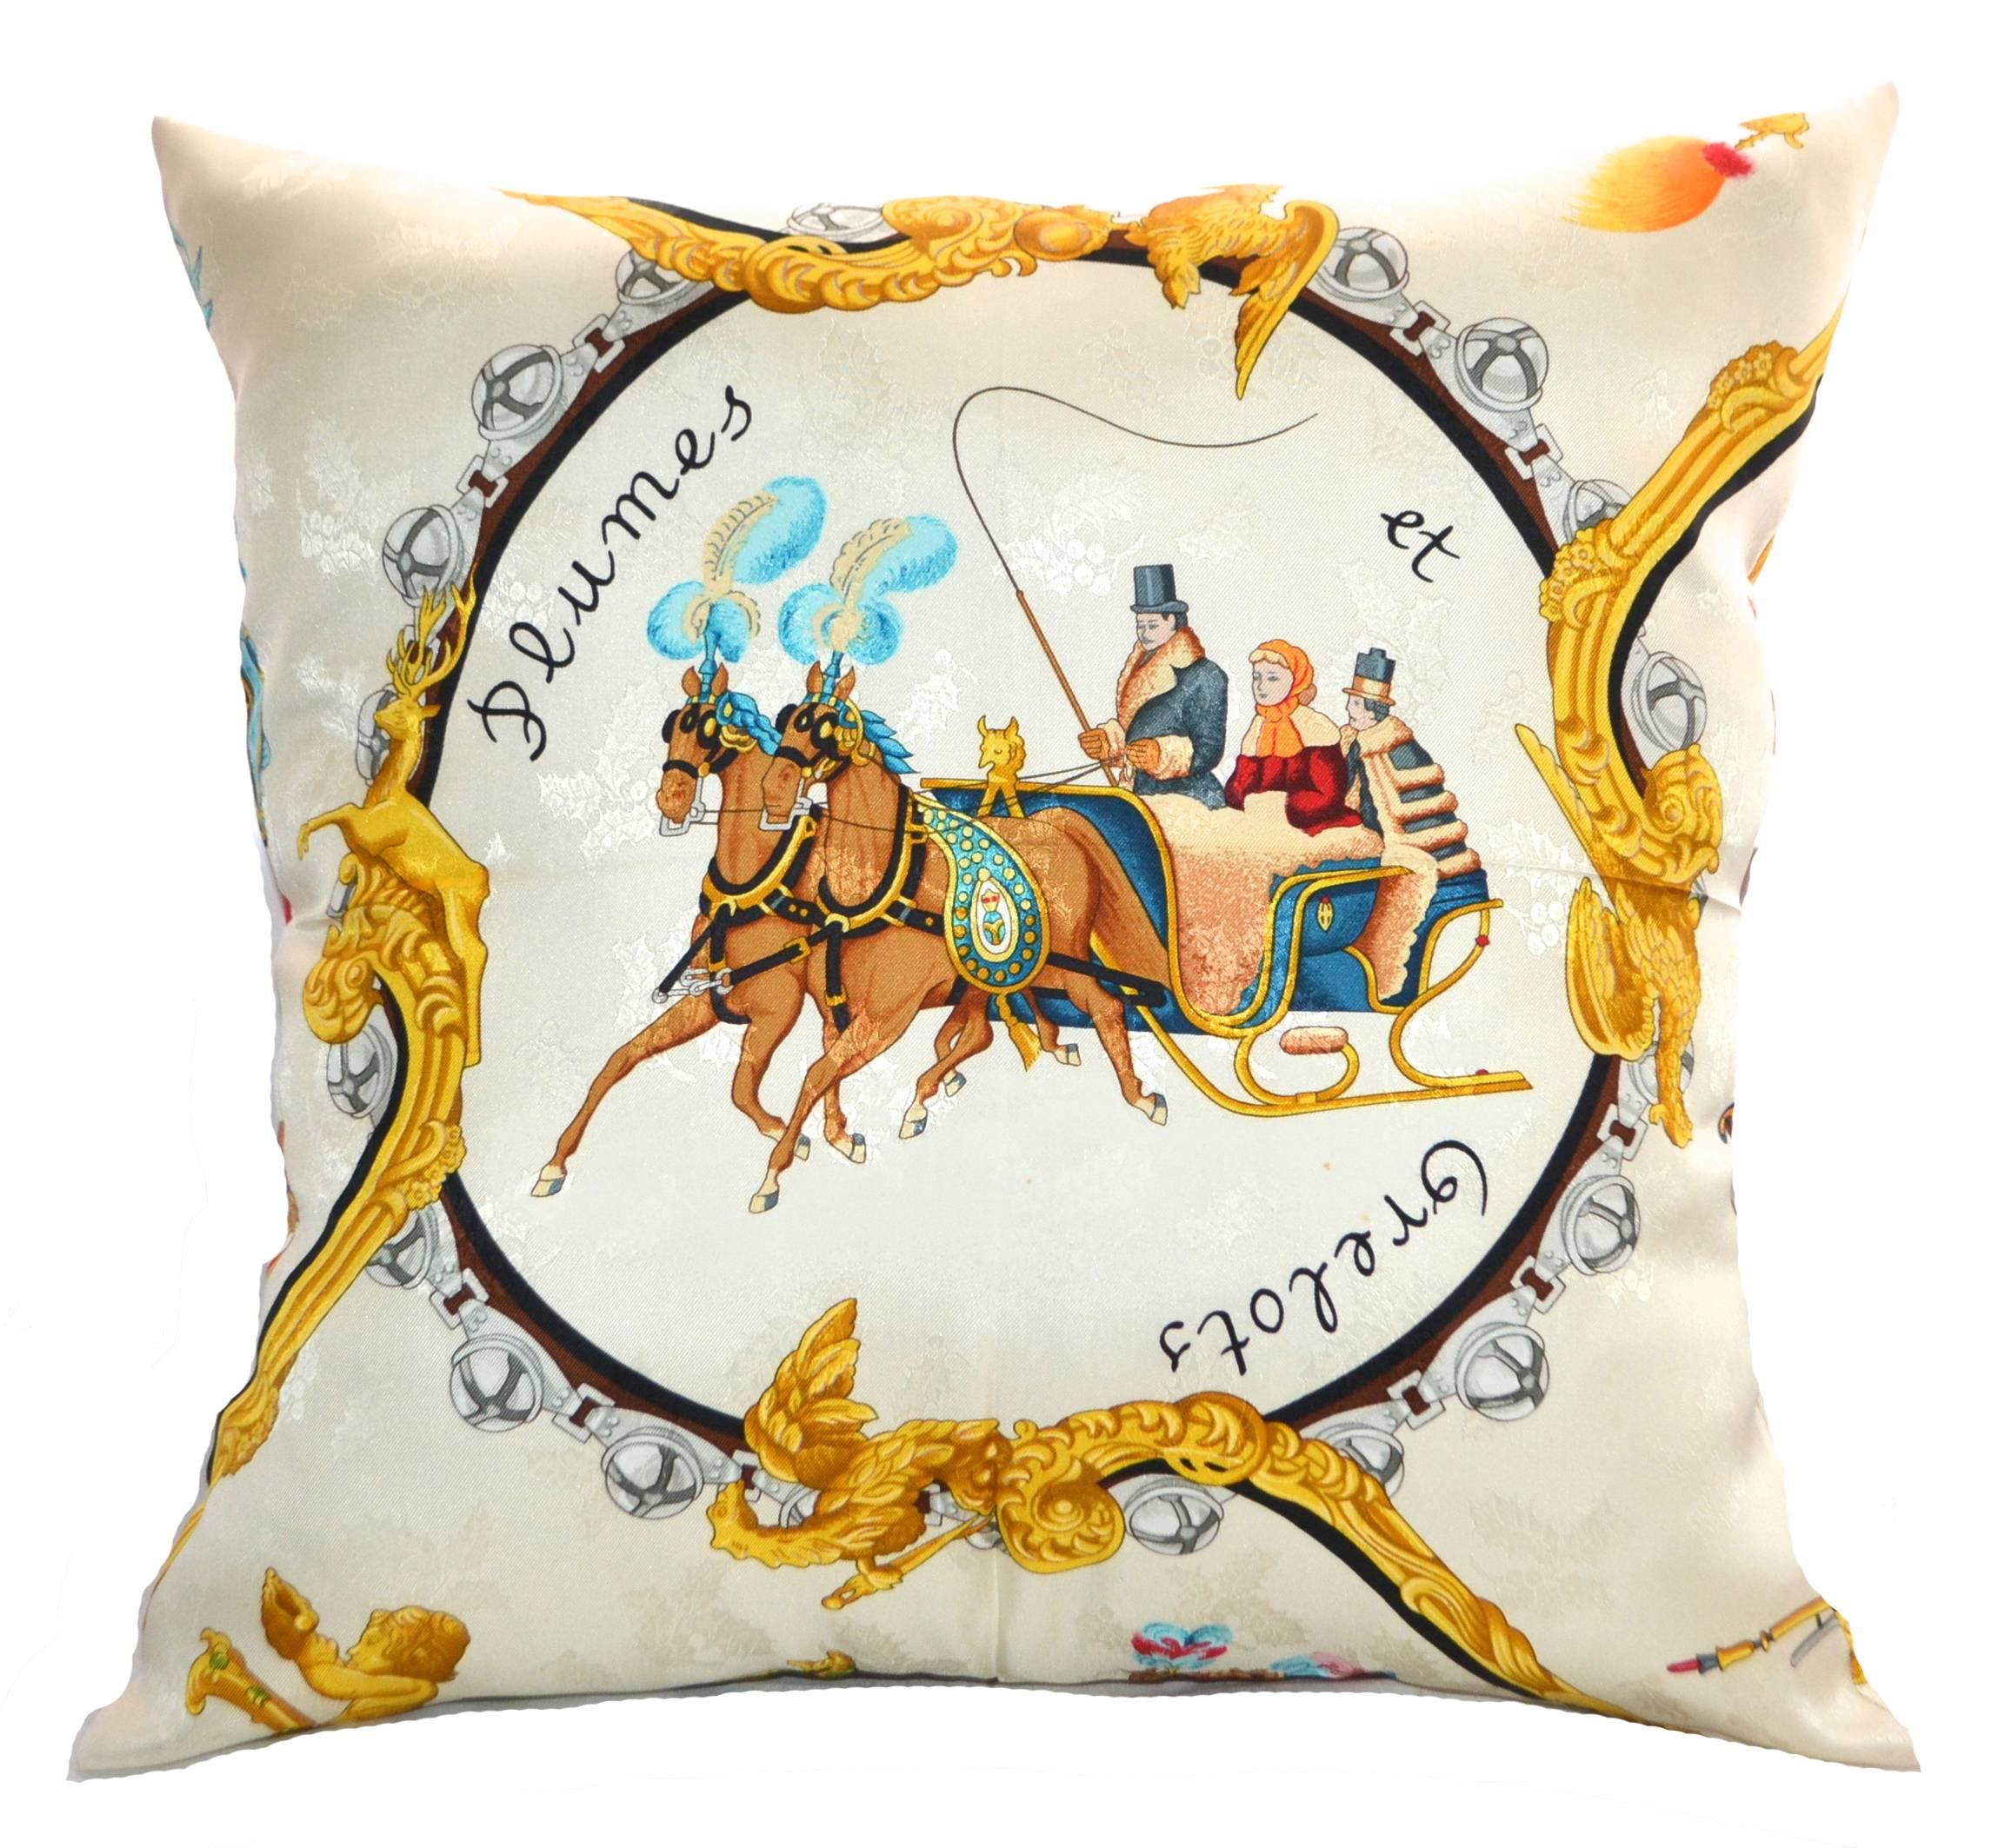 Made exclusively for iwatchjapan by Rita-Mari Couture. This elegant Hermes scarf pillow set uses the highest quality items. This piece is entirely made in Japan and manufactured in an artisanal way, in which every step of the process is carefully